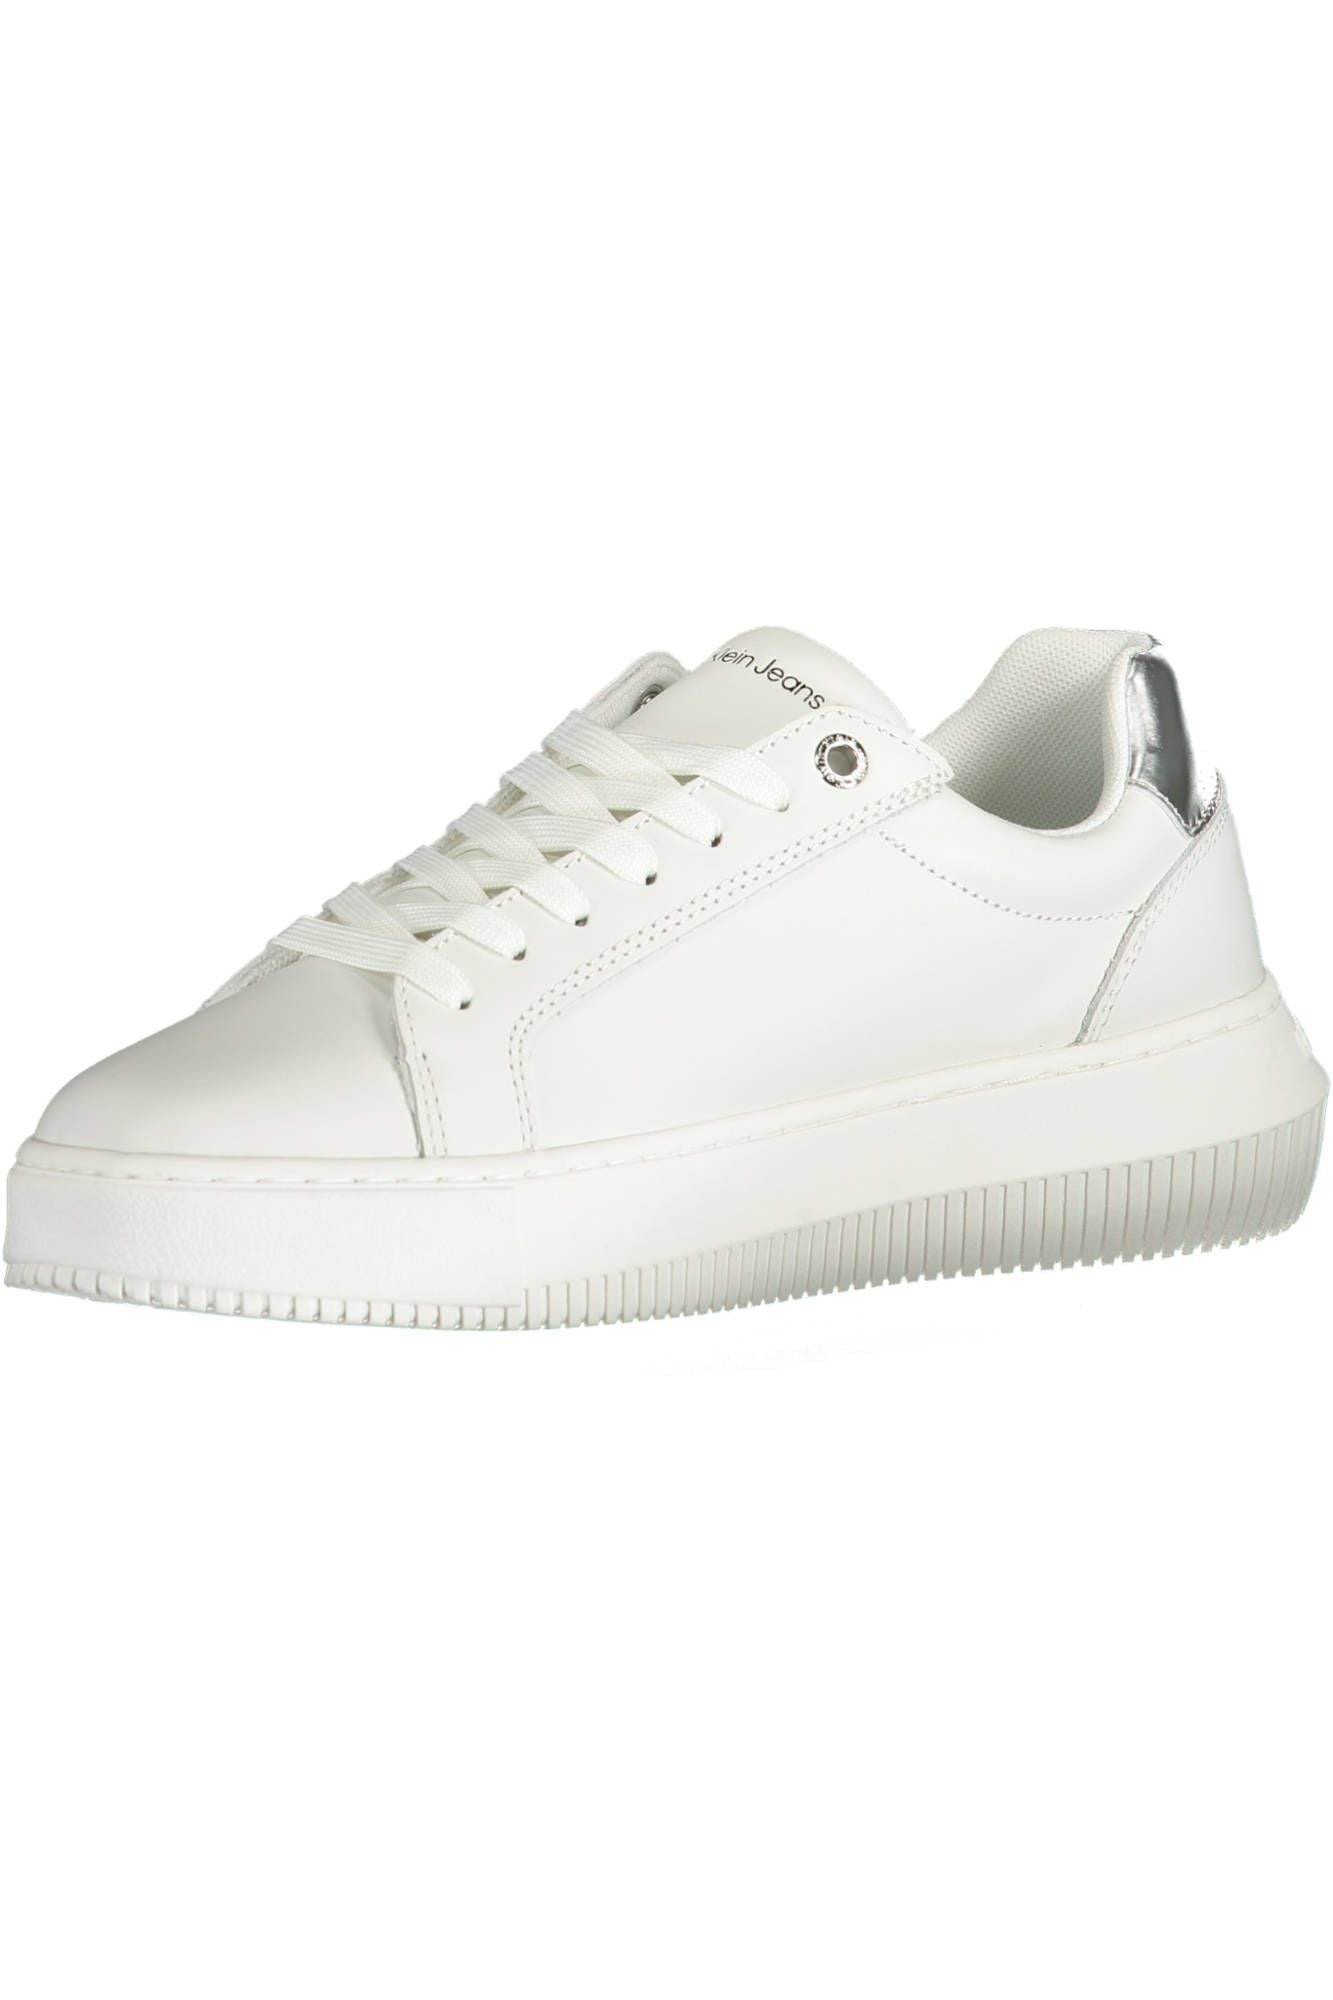 Calvin Klein Chic White Contrasting Lace-Up Sneakers